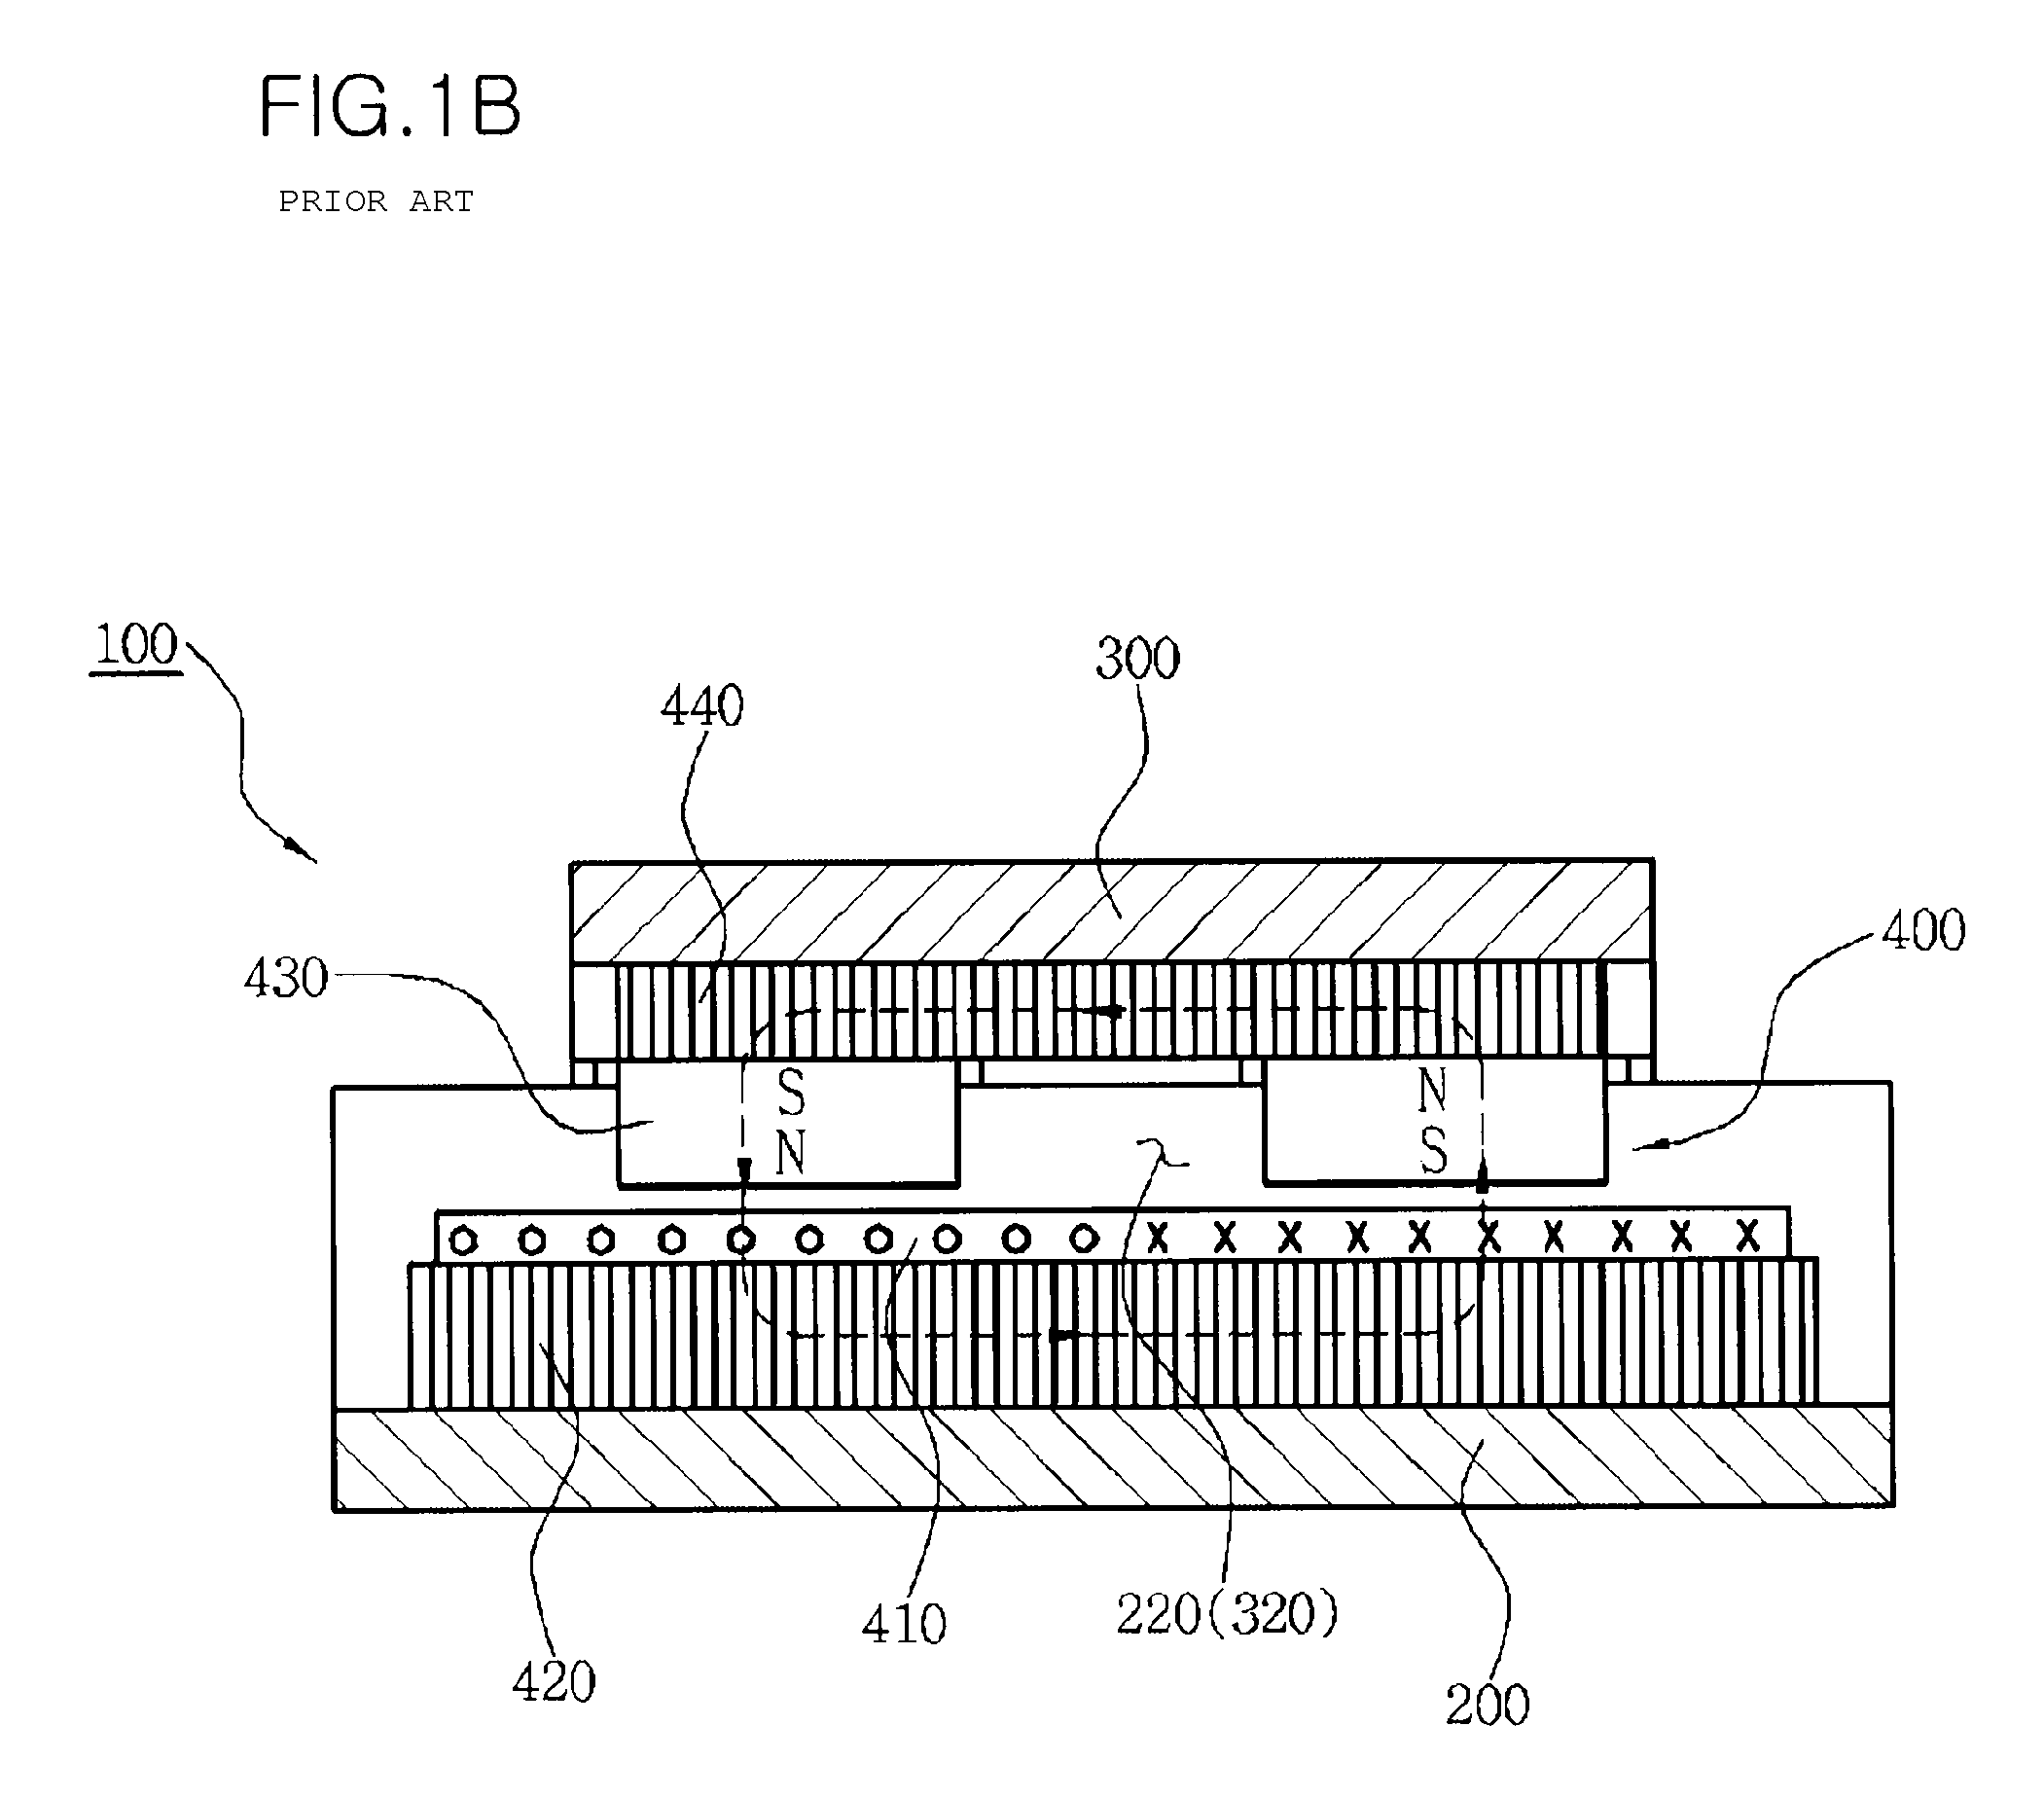 Planar stage moving apparatus for machine